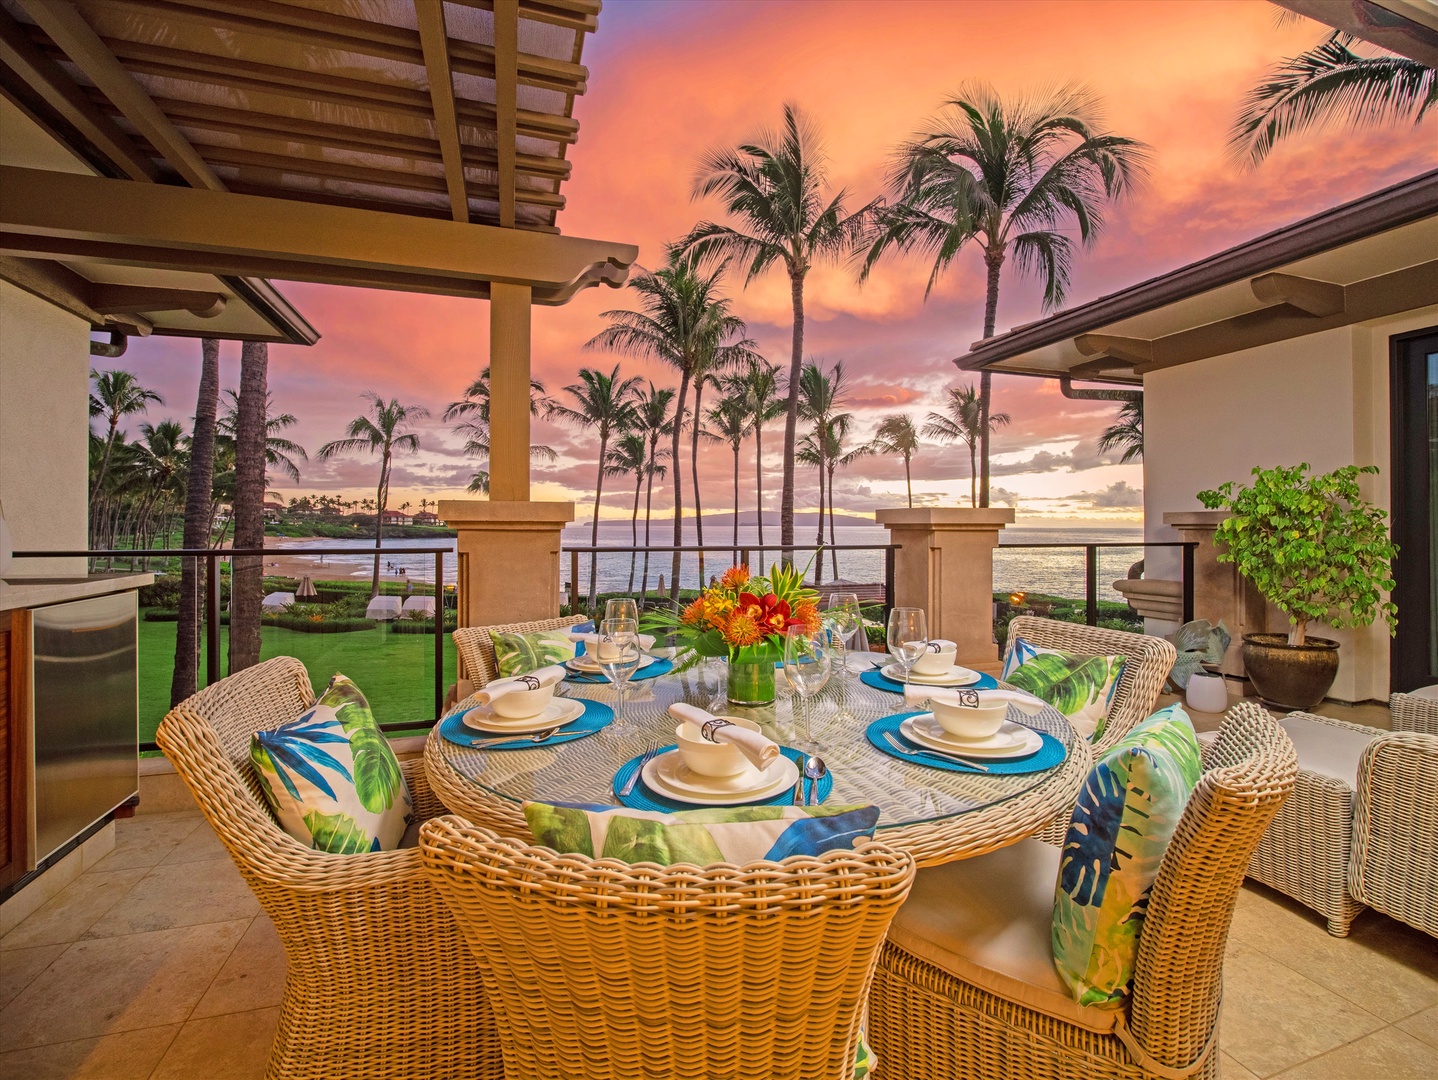 Wailea Vacation Rentals, Royal Ilima A201 at Wailea Beach Villas* - Alfresco dining area with a built-in BBQ, set against a backdrop of palm trees and ocean views.